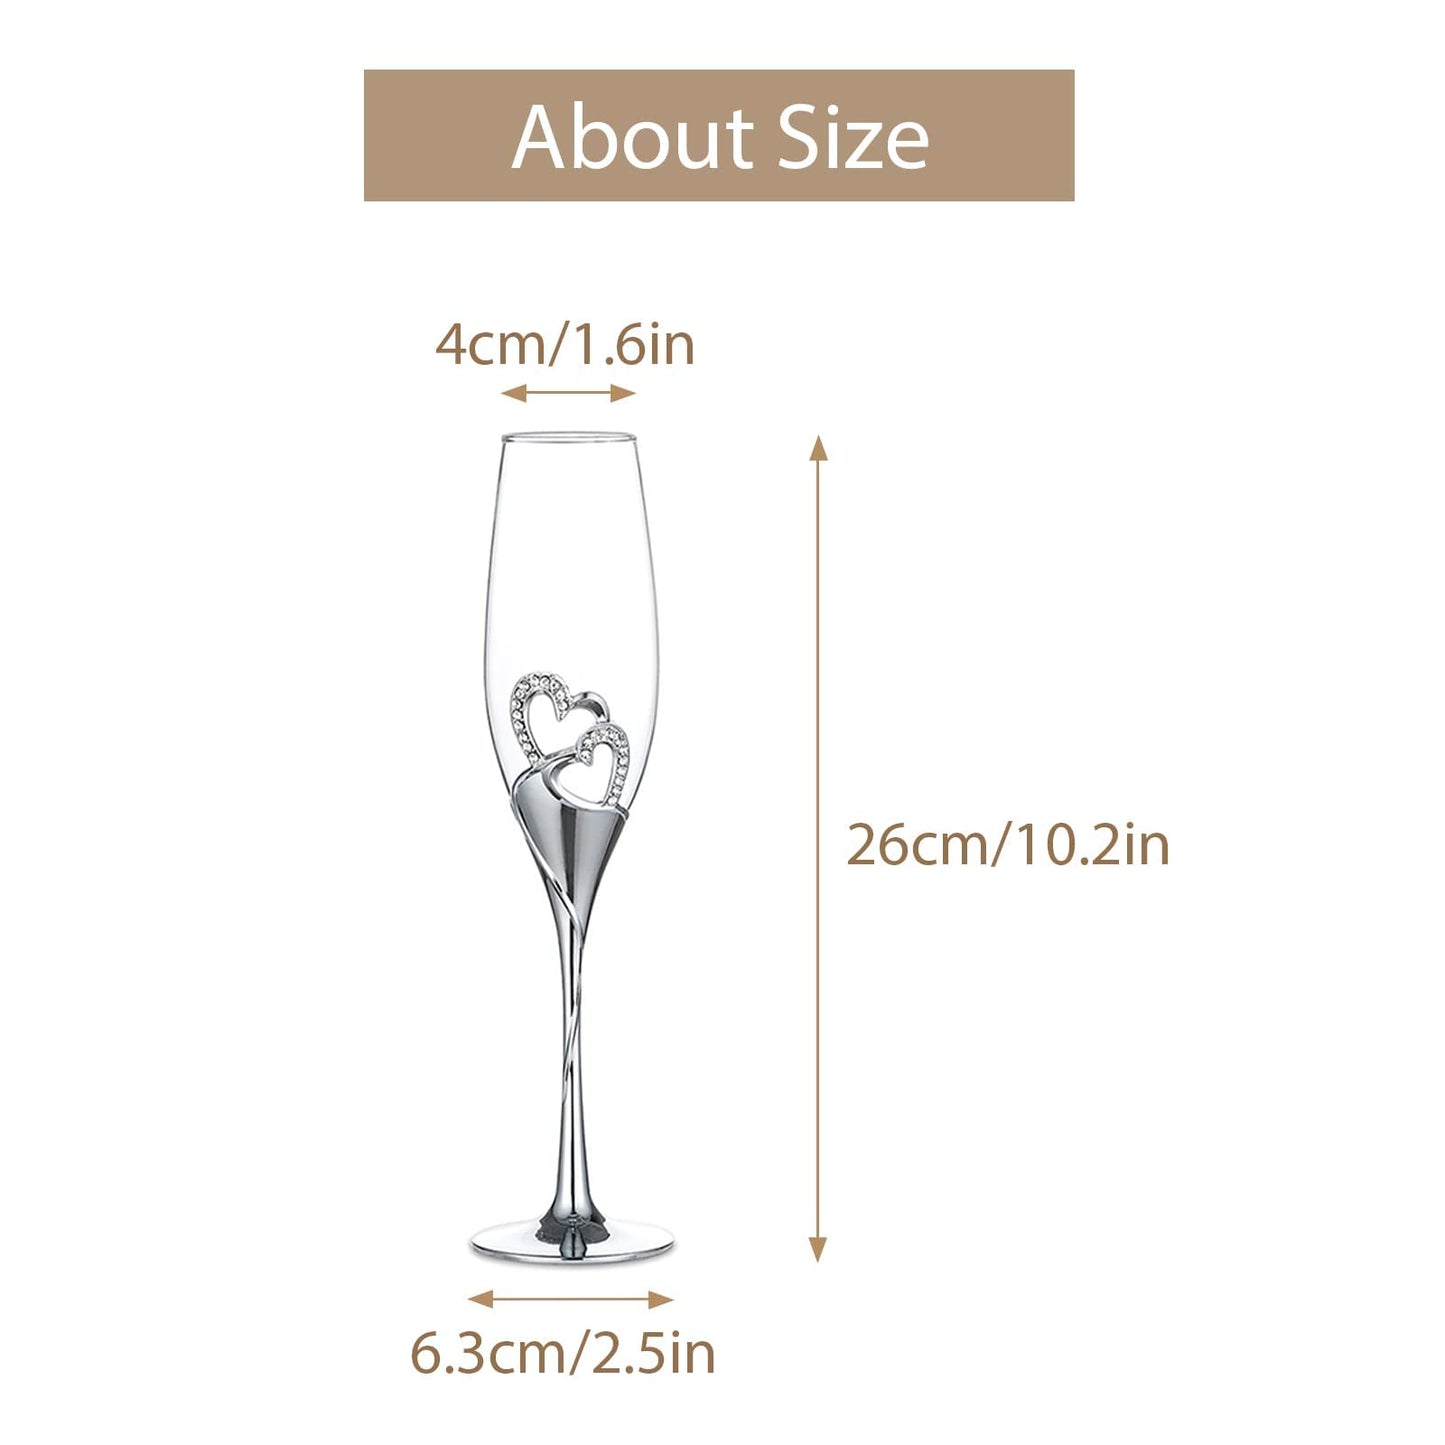 Crystal toasting glass dimensions